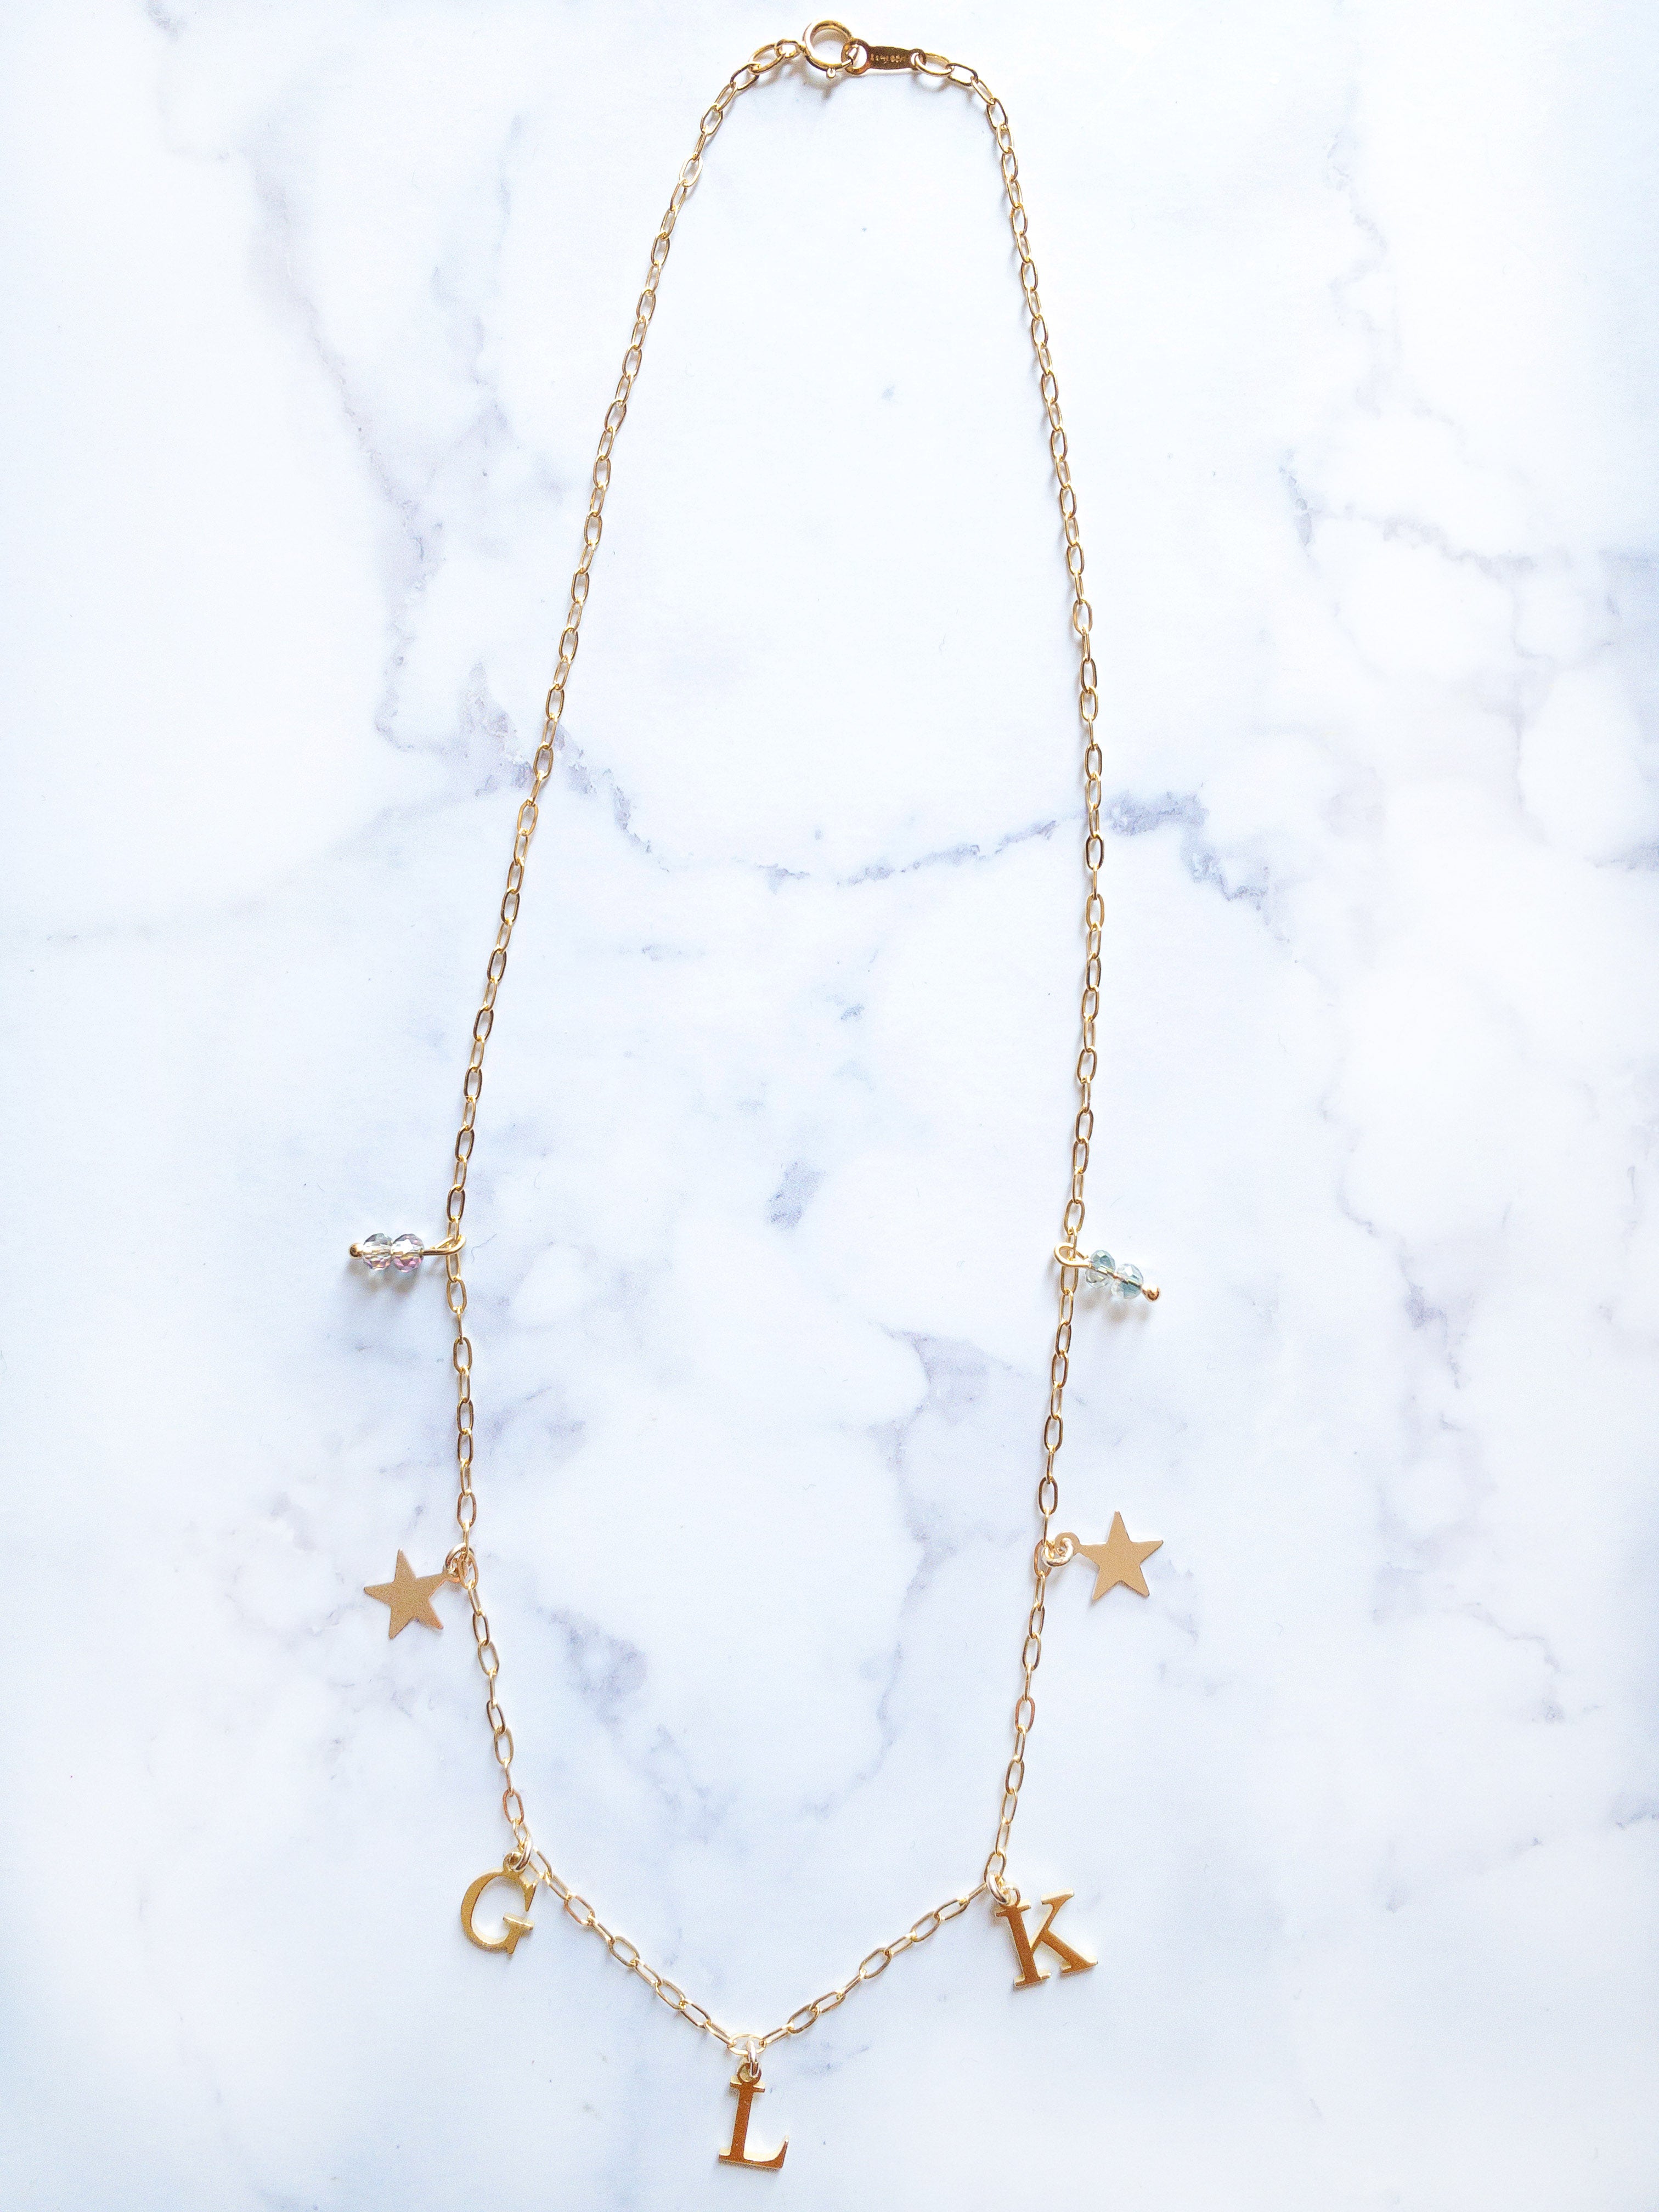 Personalised Gold Charm Necklace with Stars and Beads